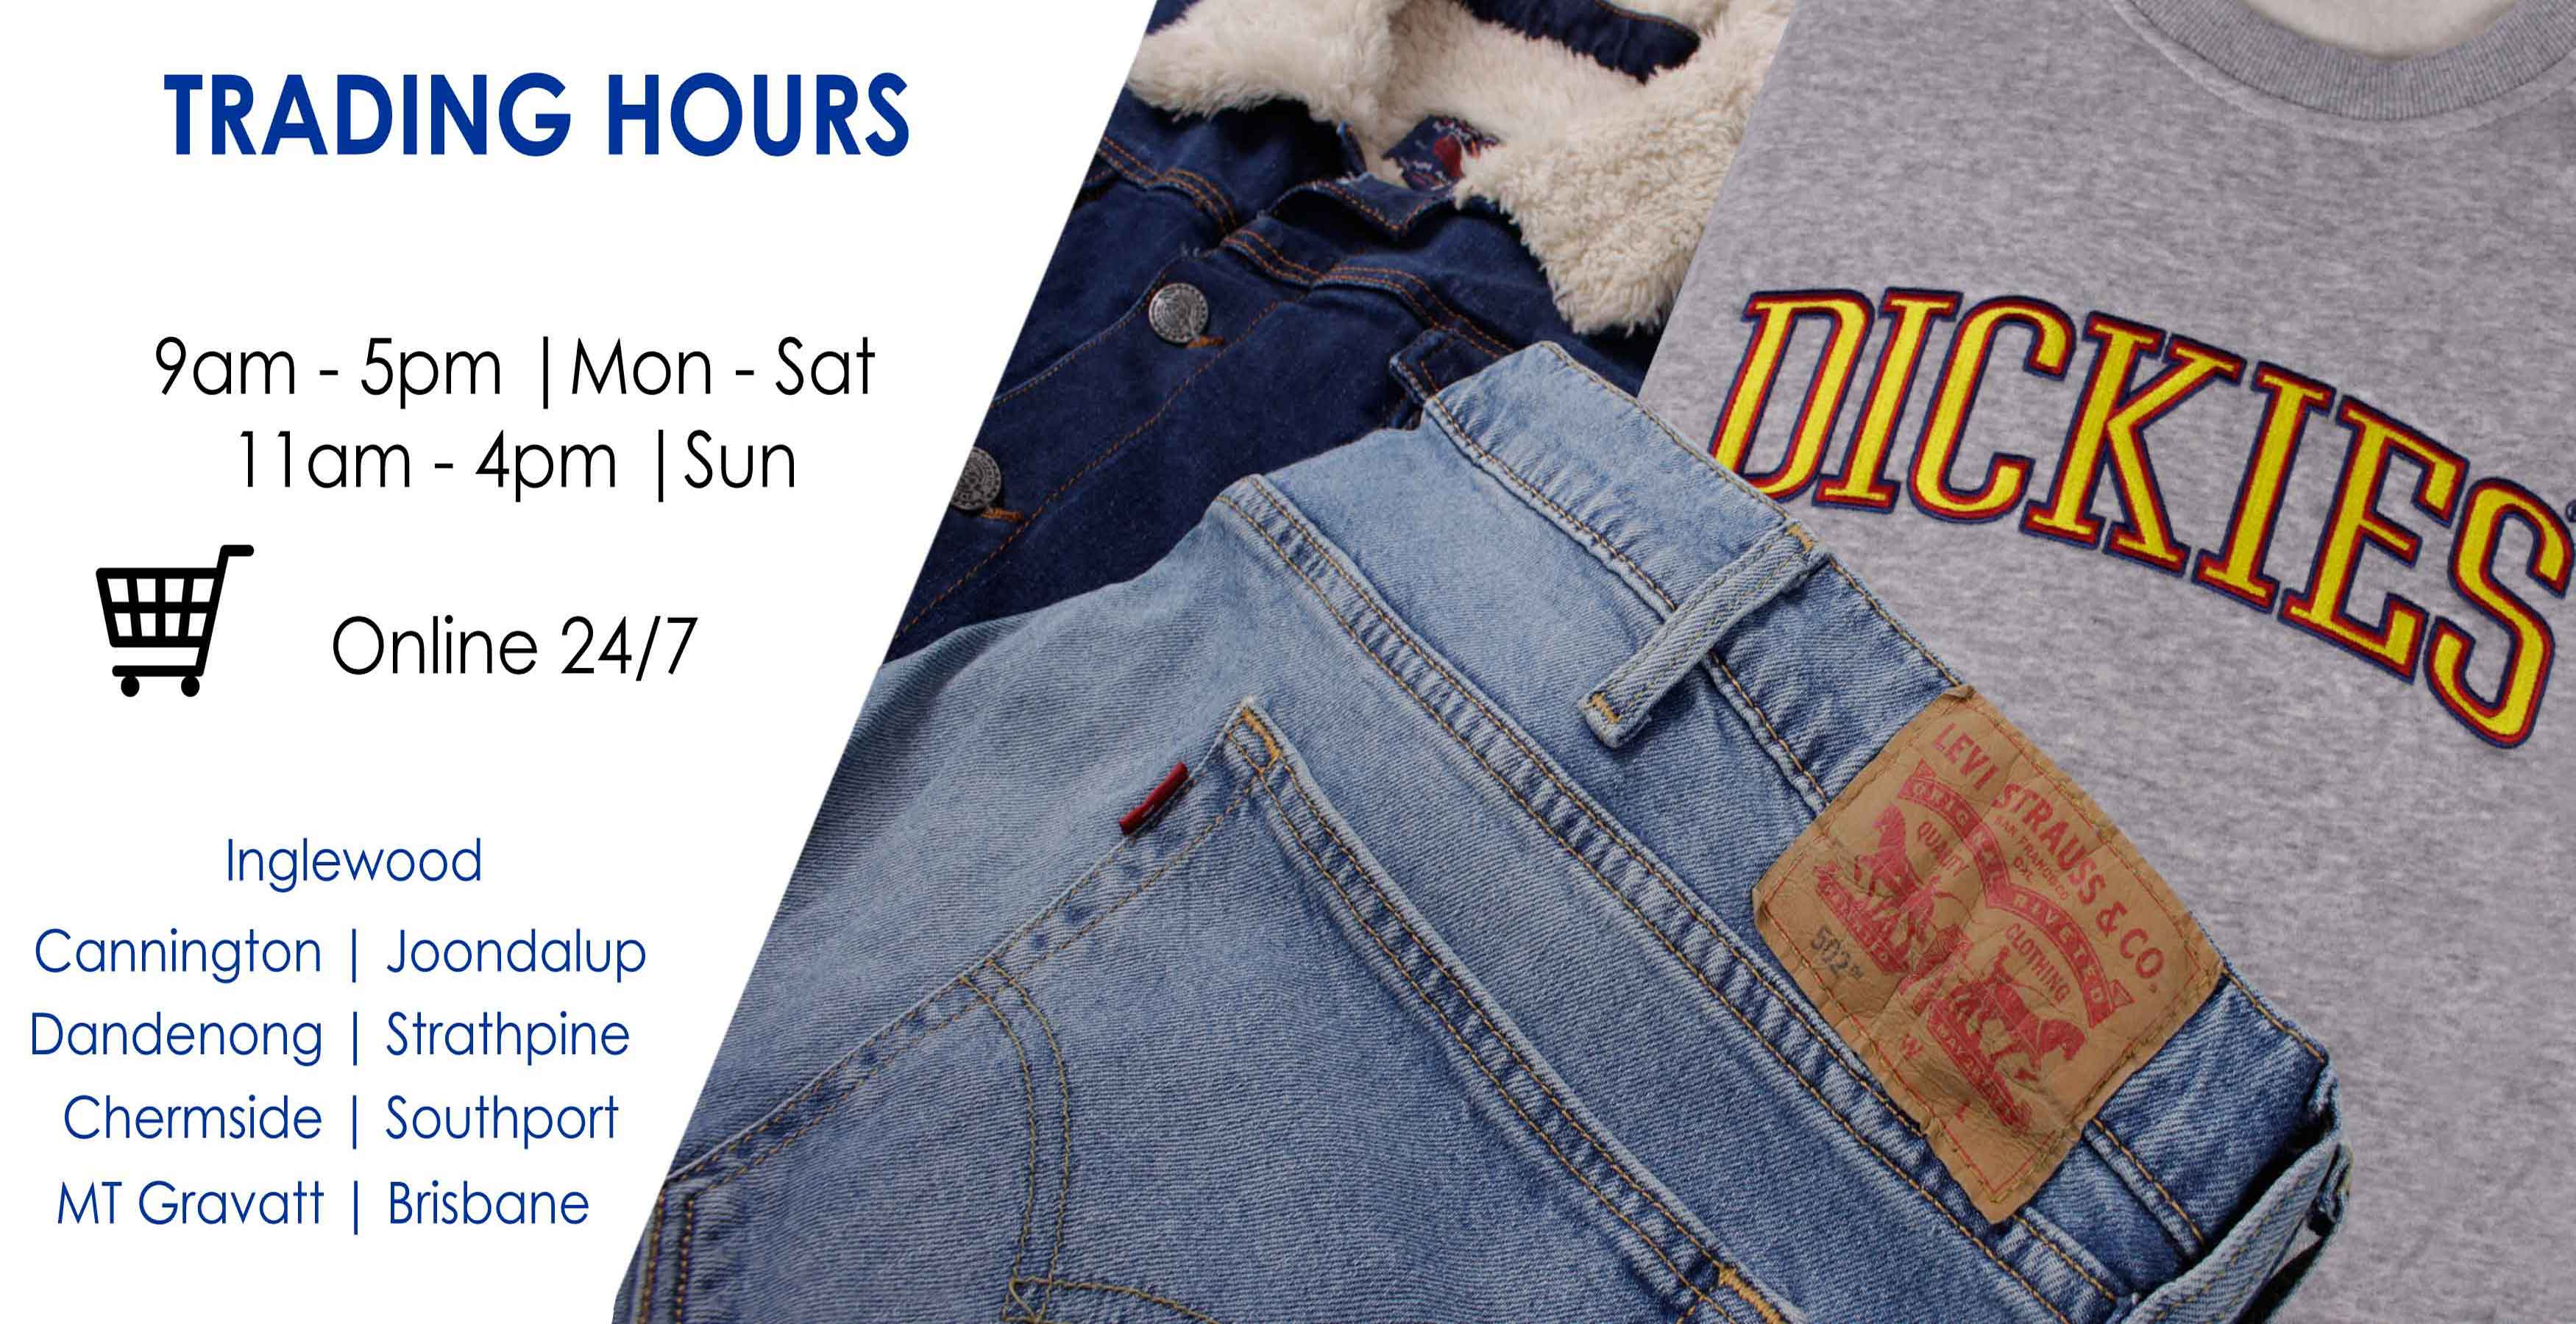 New Trading Hours